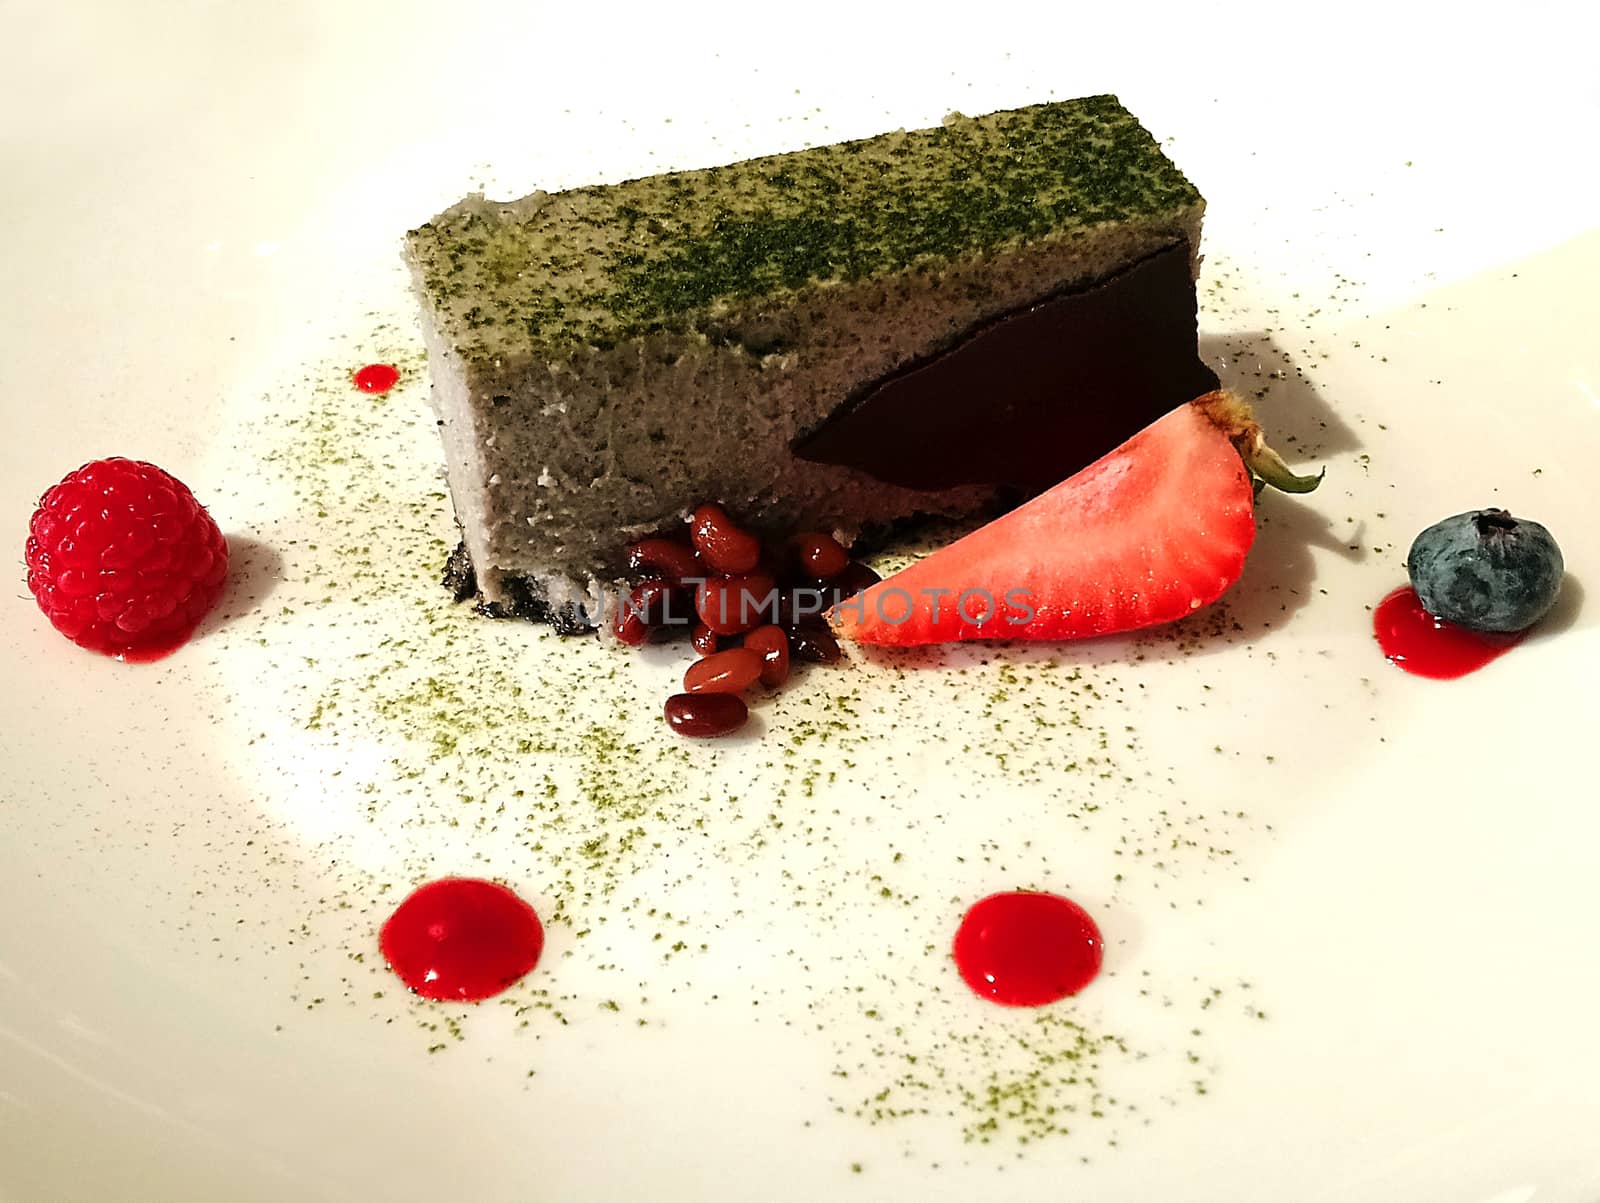 Chocolate cake with matcha powder and berries on white plate serve in hotel restaurant